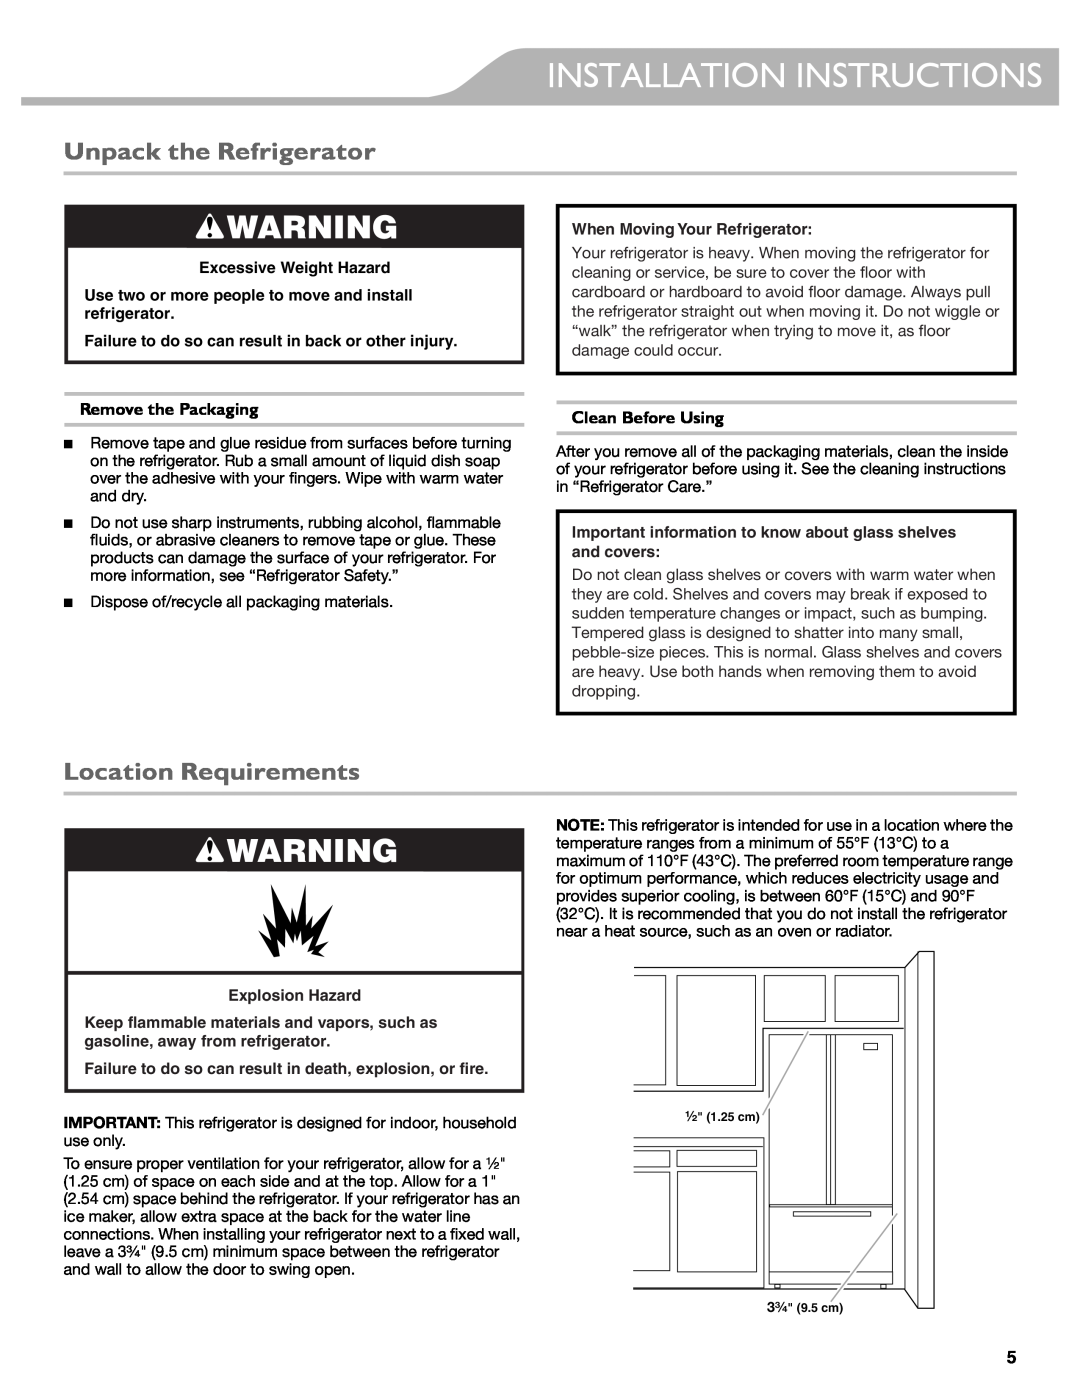 KitchenAid W10417002A Installation Instructions, Unpack the Refrigerator, Location Requirements, Remove the Packaging 